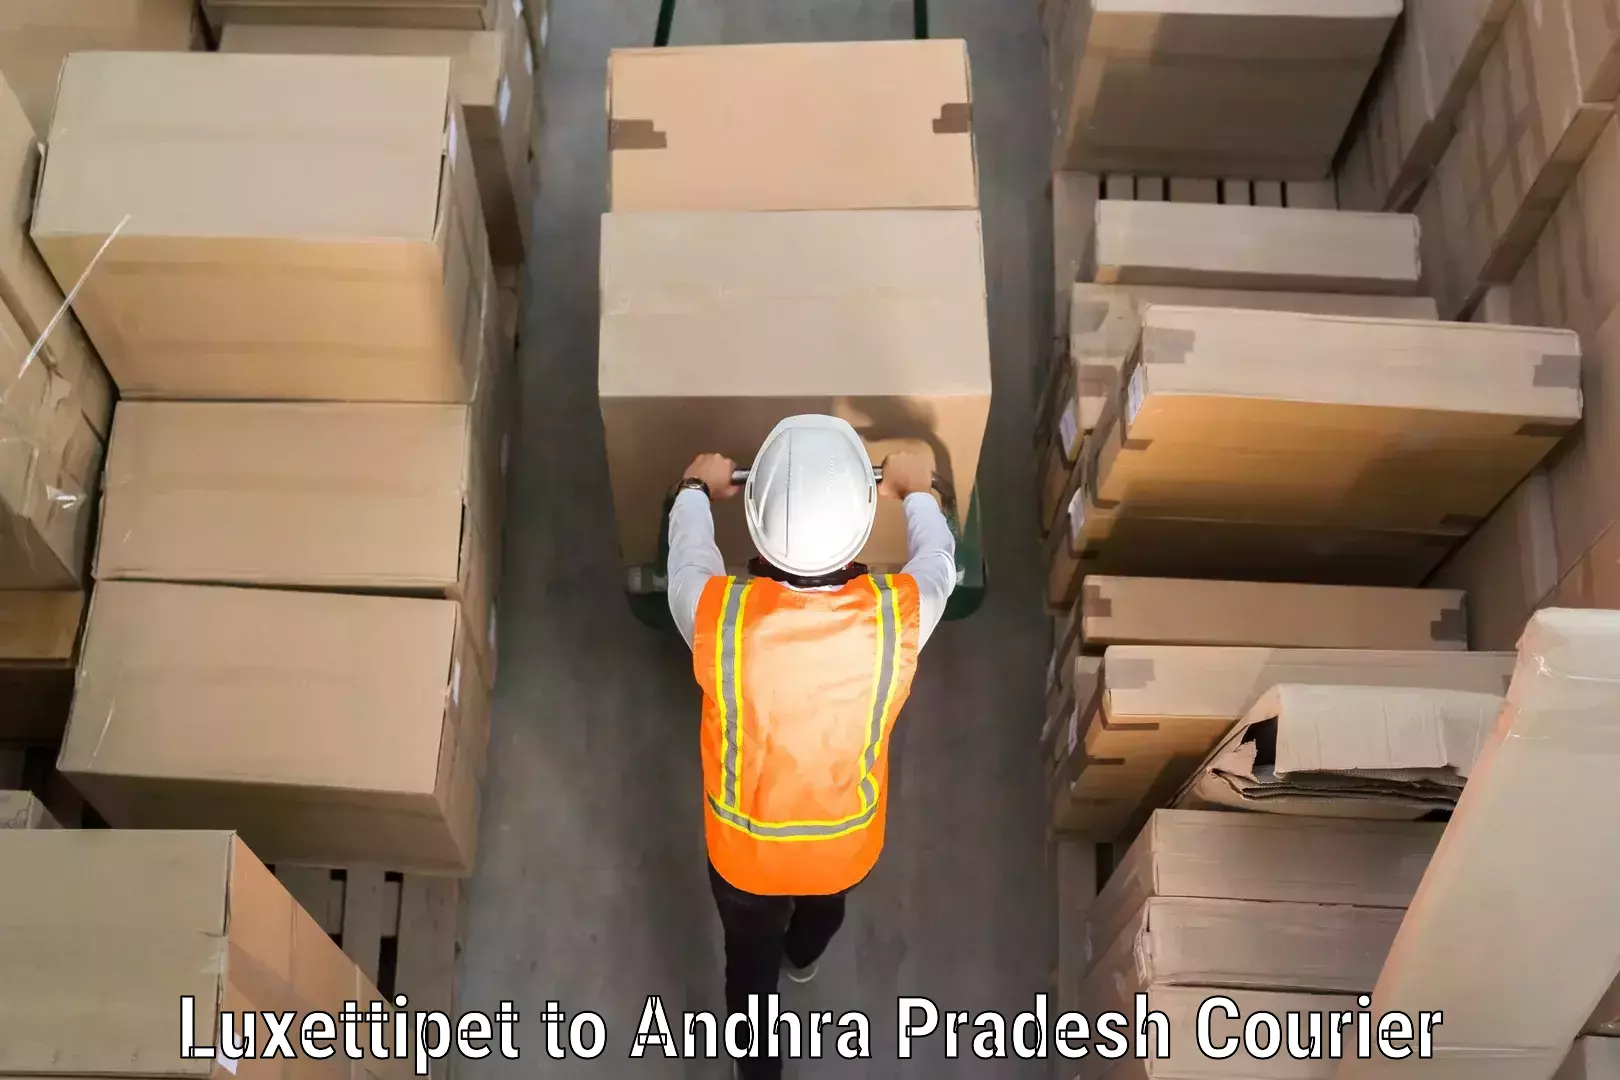 Online luggage shipping booking Luxettipet to Srikalahasti